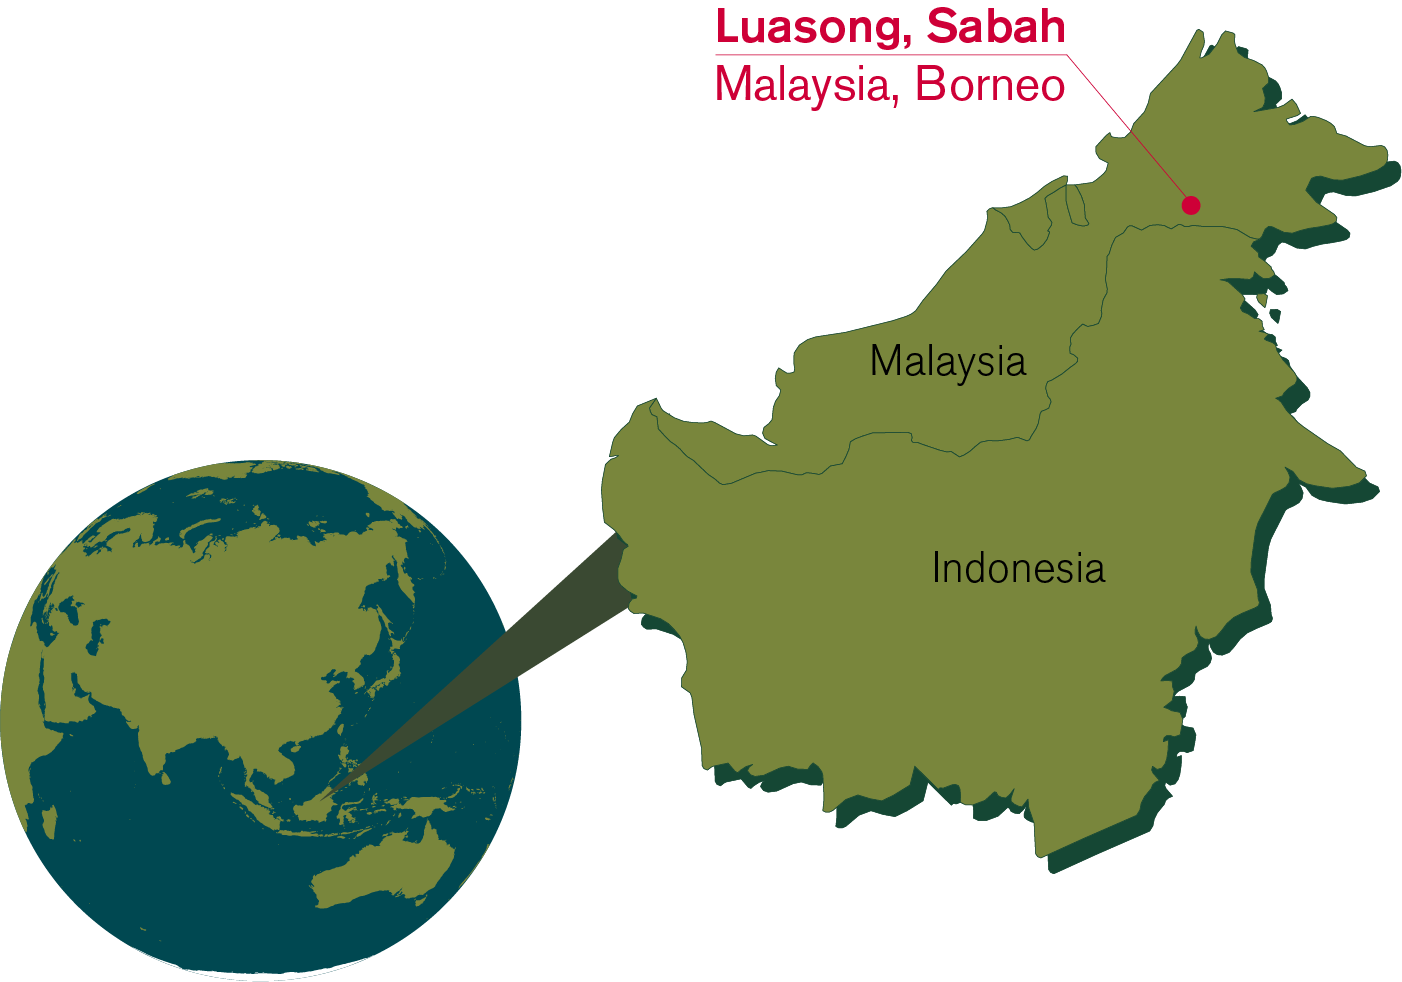 Map showing the Malaysian village of Luasong located in the north of the island of Borneo.